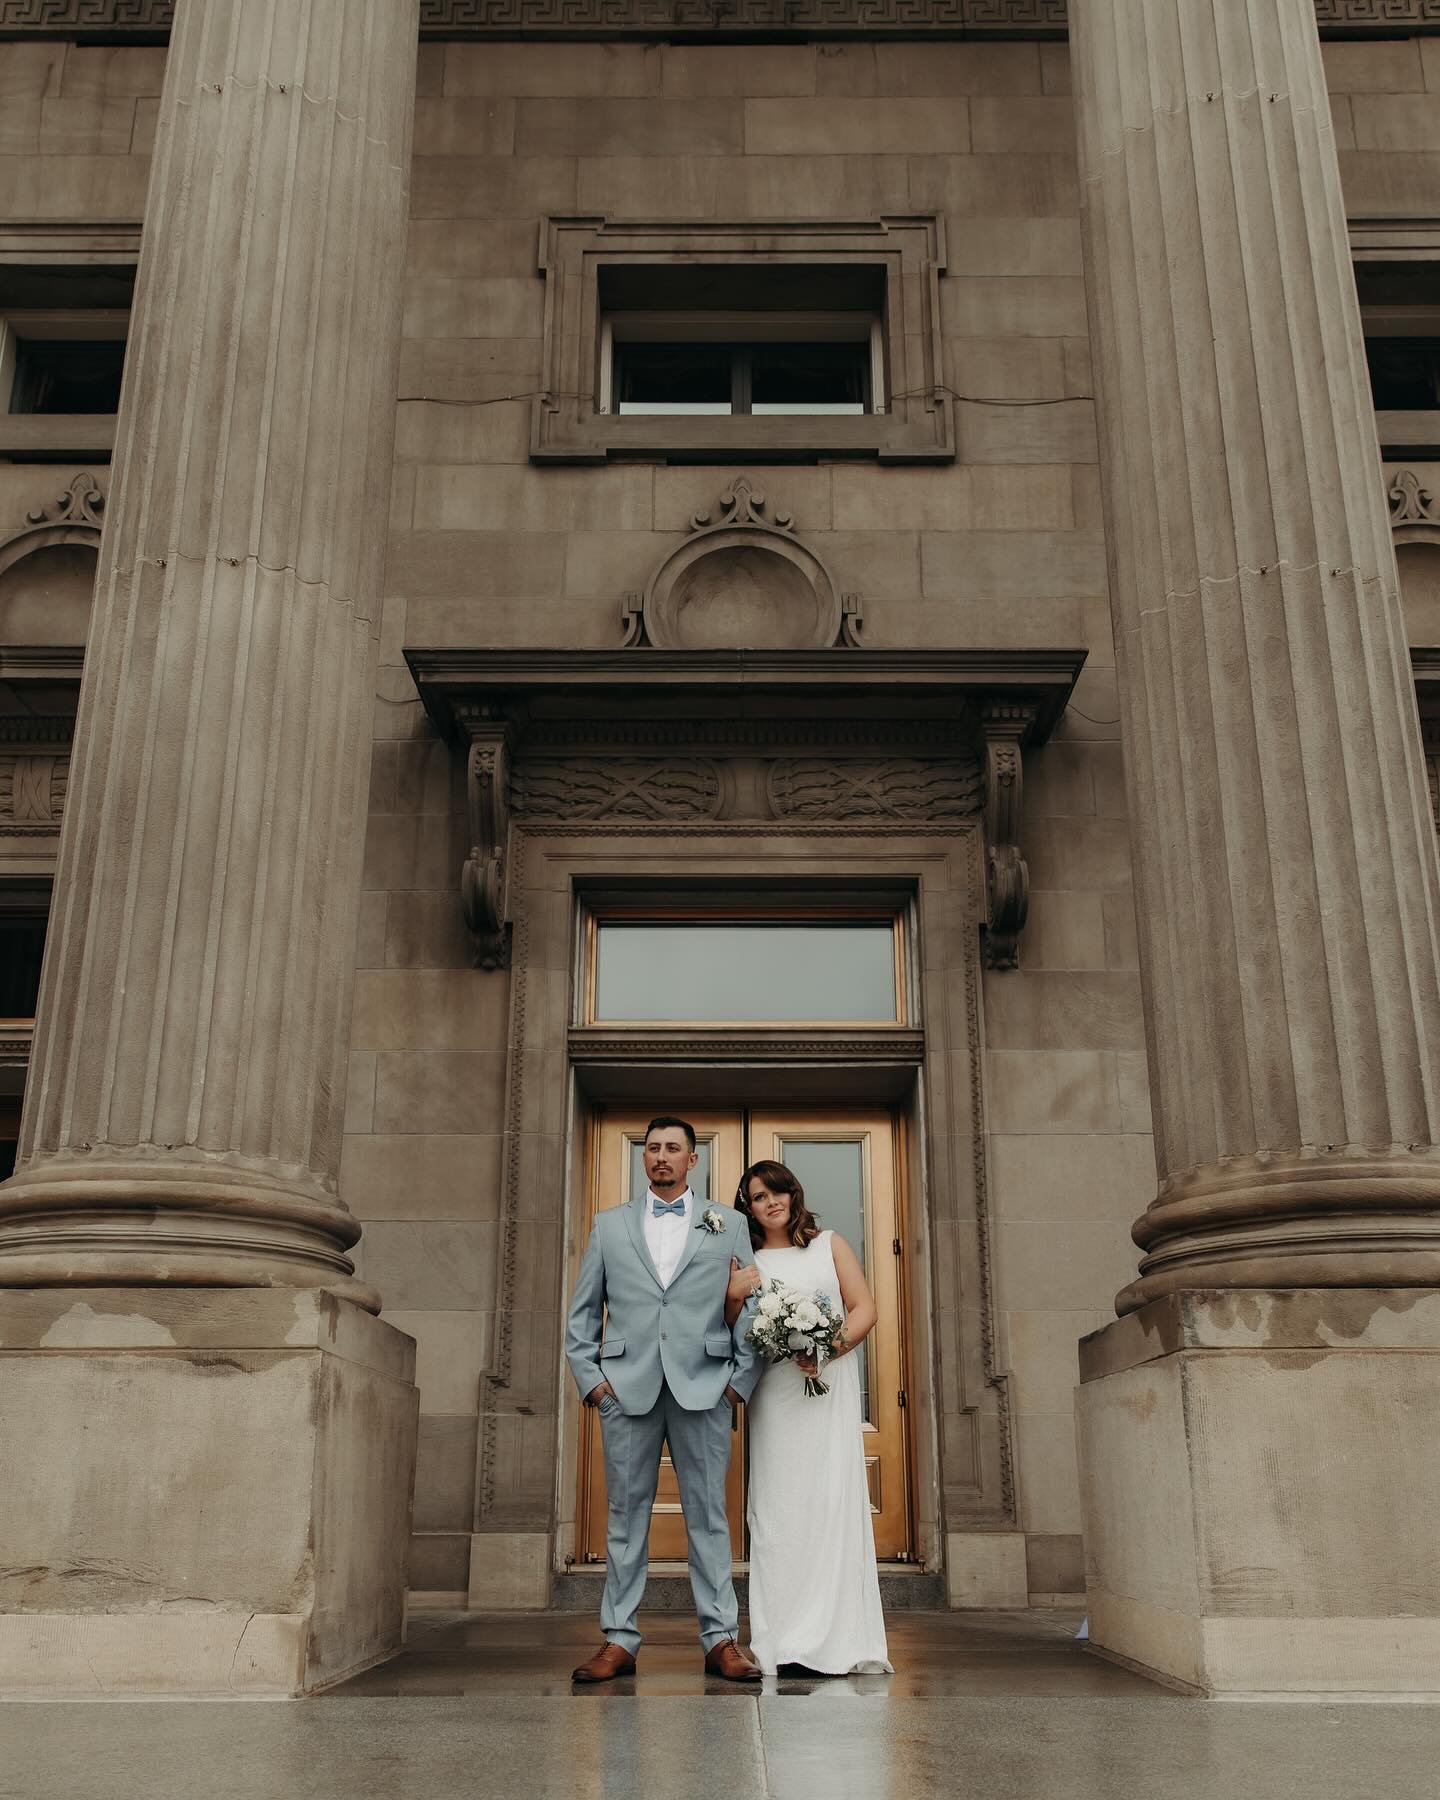 It&rsquo;s been on my bucket list to shoot at the capital building, and thanks to @meganlynn.lo, not only did I get to shoot there, I got to shoot their freaking elopement! 😍😍😍

What a special, intimate moment I had the honor of capturing 🥹 congr